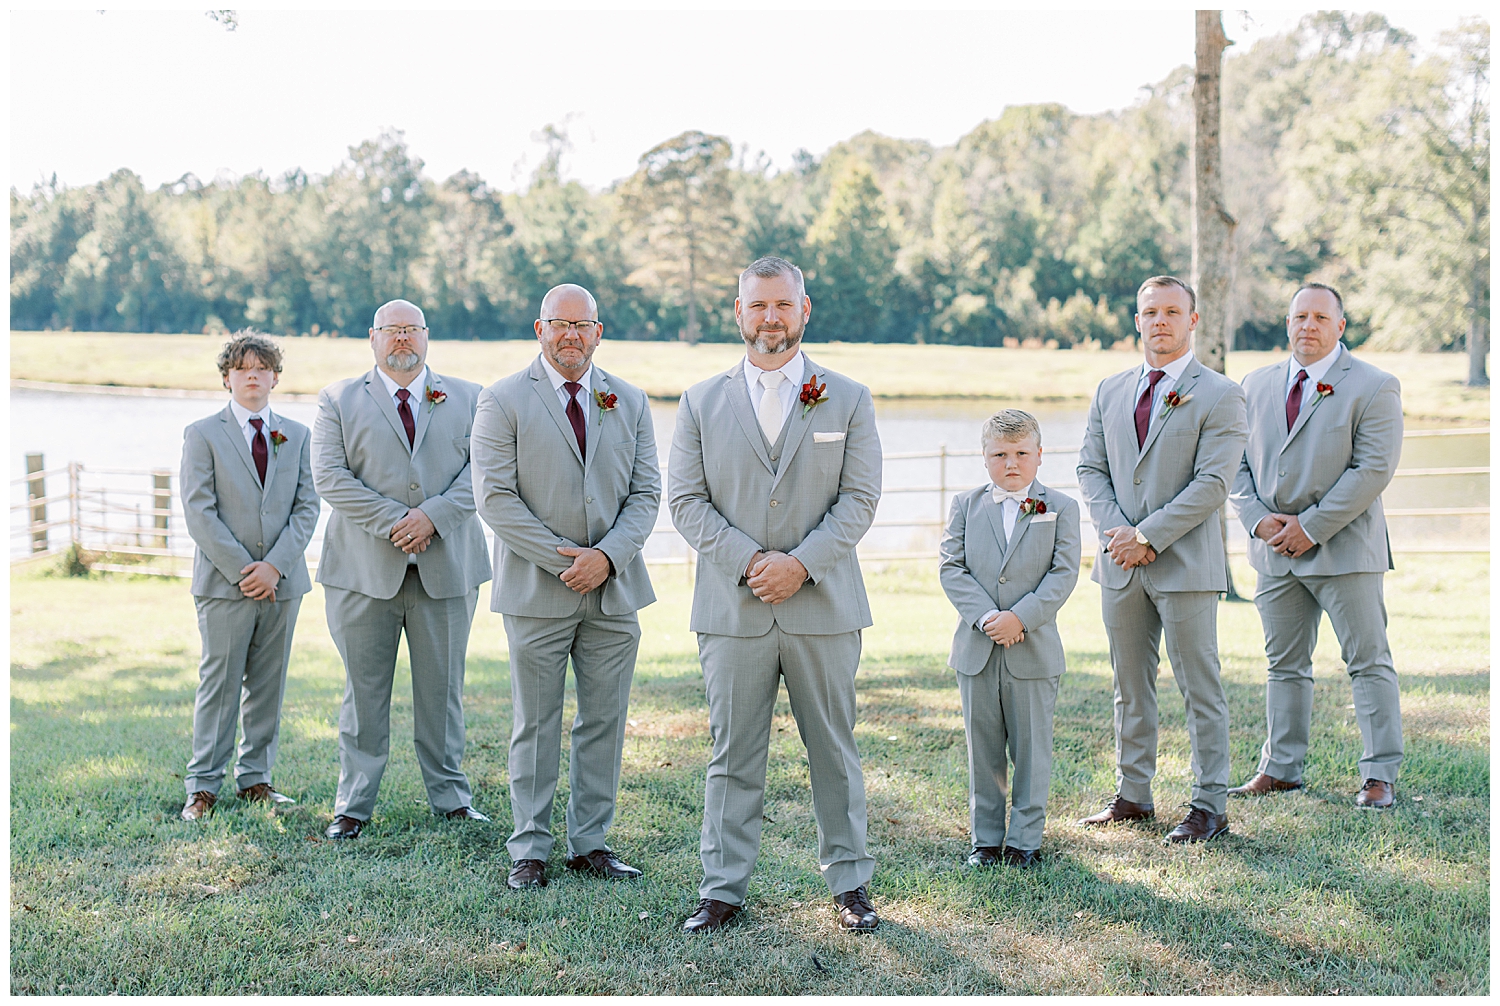 The groom and groomsmen stand in a diagonal.